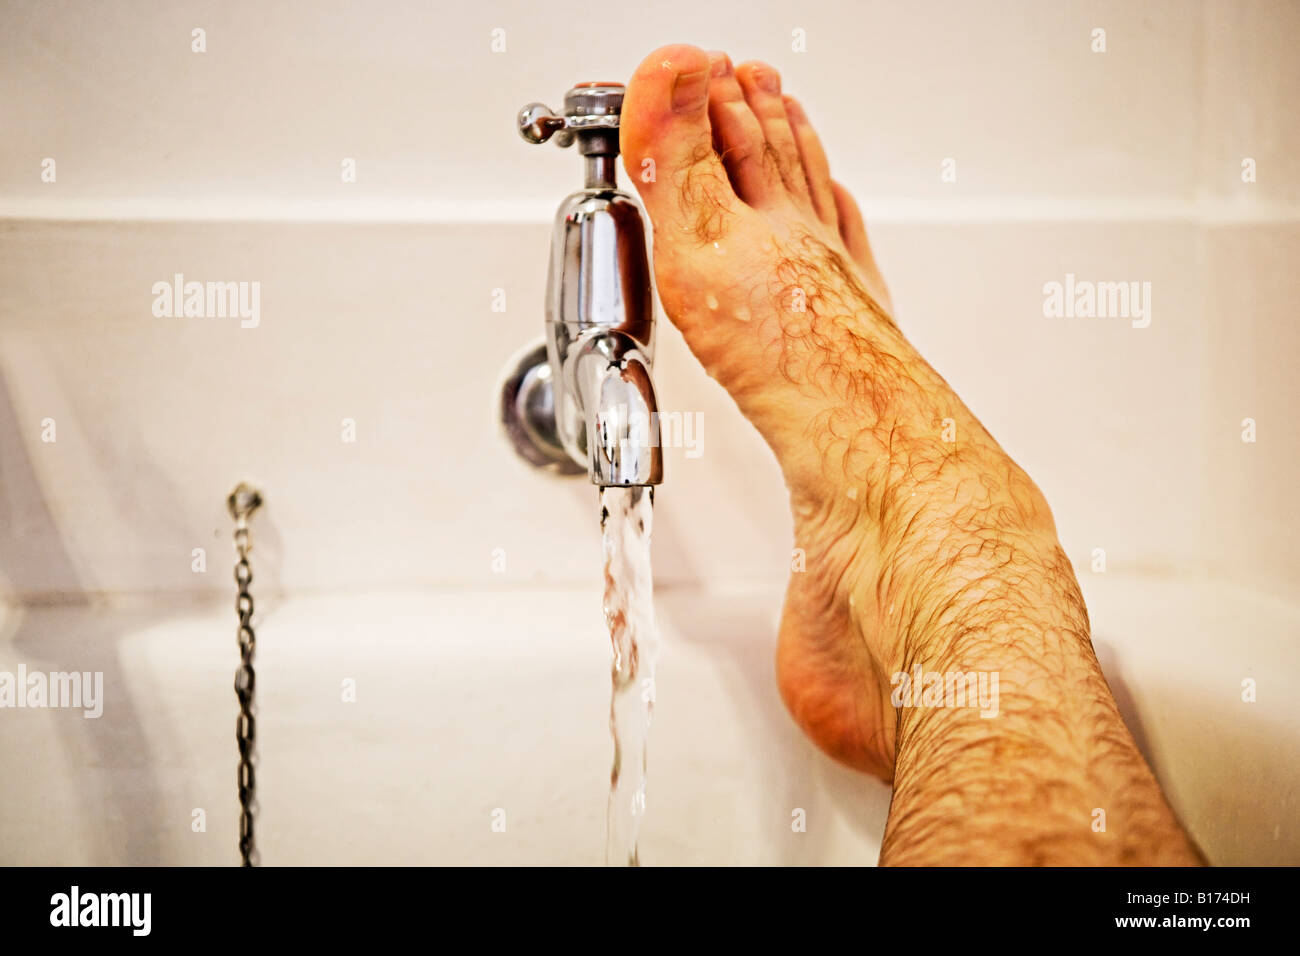 Man's foot in bath turns on tap Stock Photo